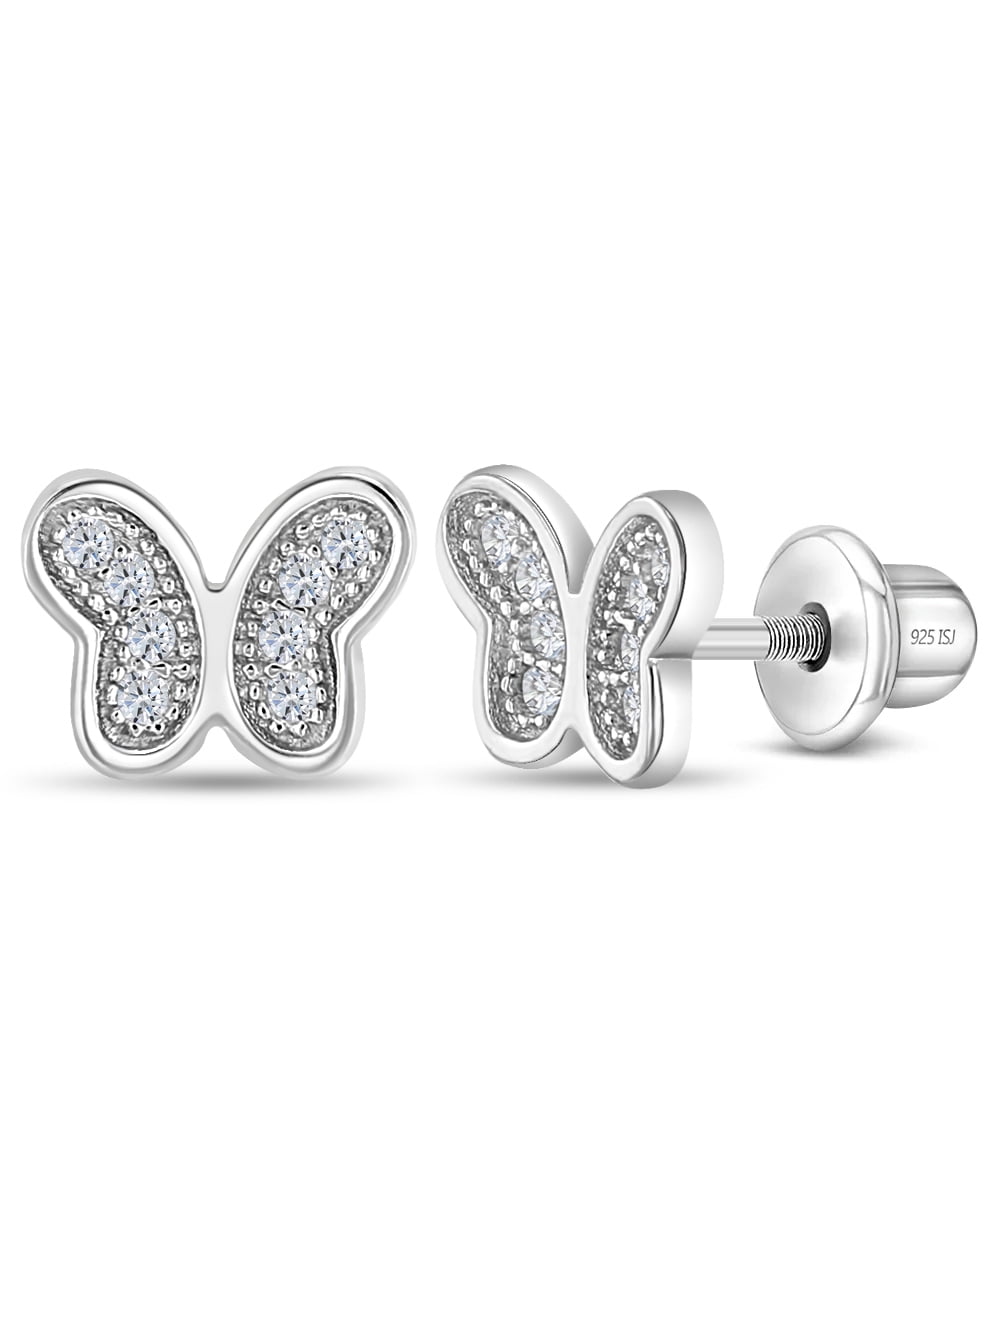 CLARA 925 Sterling Silver Talia Earrings with Screw Back Gold Rhodium